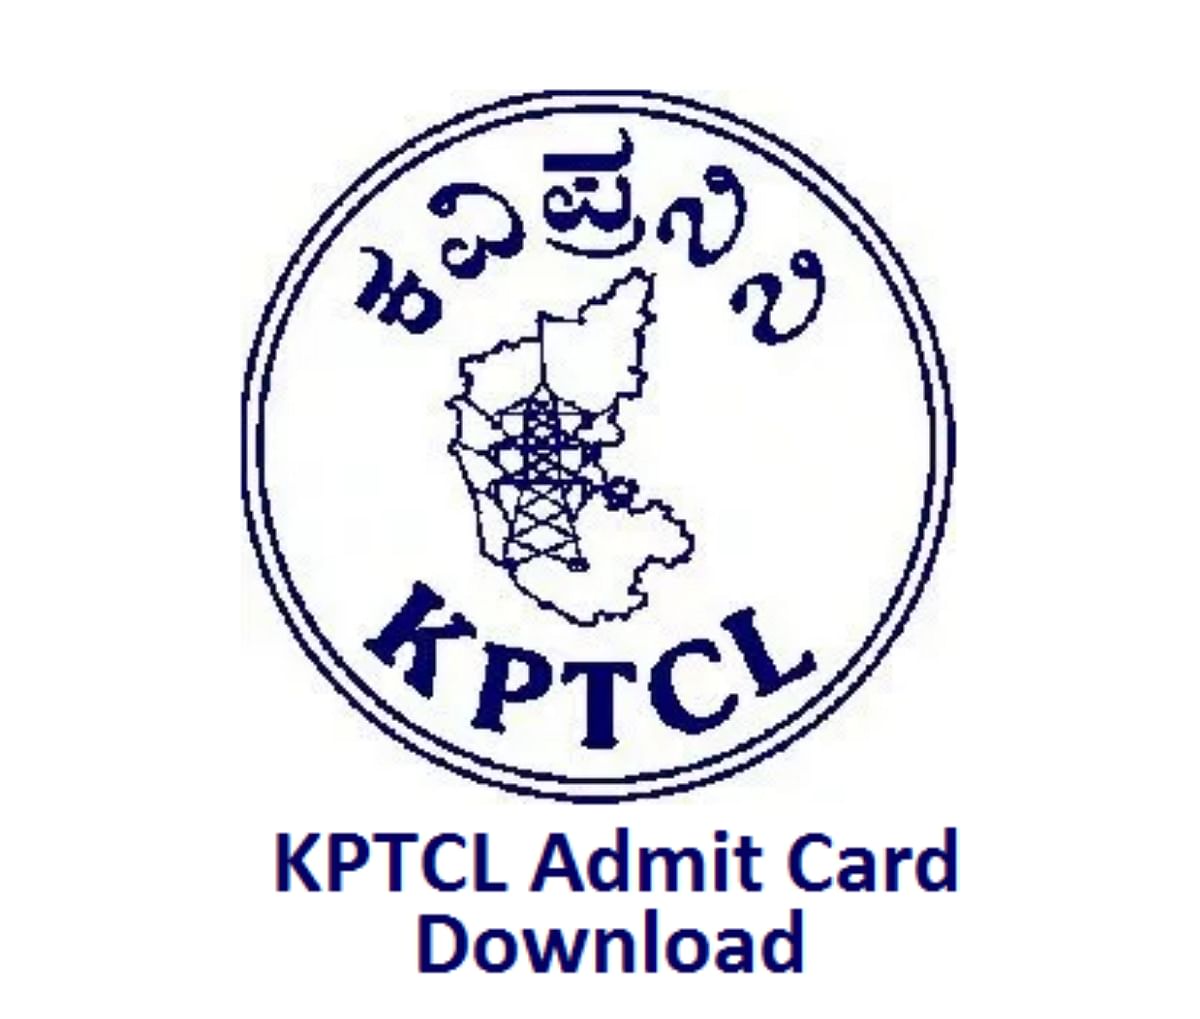 KPTCL Admit Card 2020 for Junior Powerman 2nd Round Exam Released, Download Now